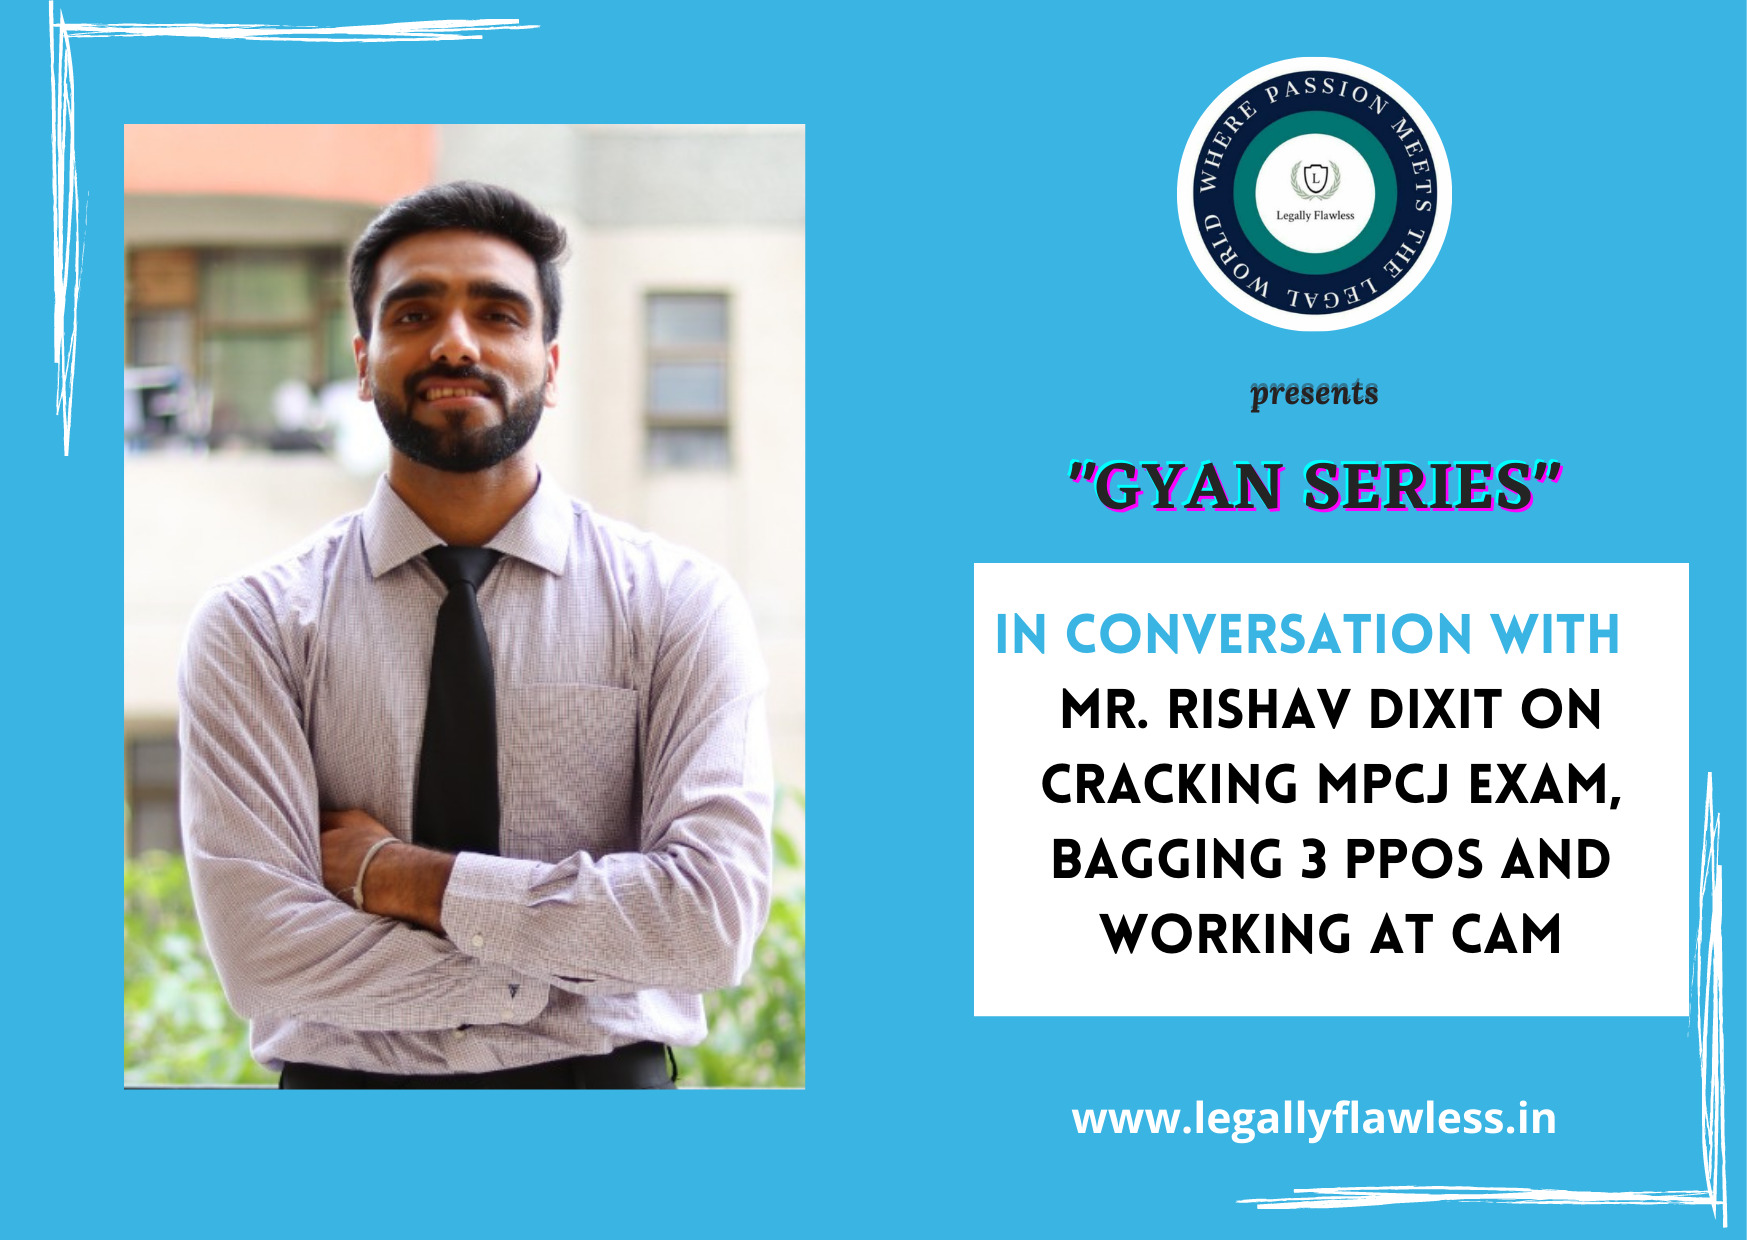 In conversation with Mr. rishav dixit on cracking MPCJ Exam, bagging 3 PPOs and working at cam